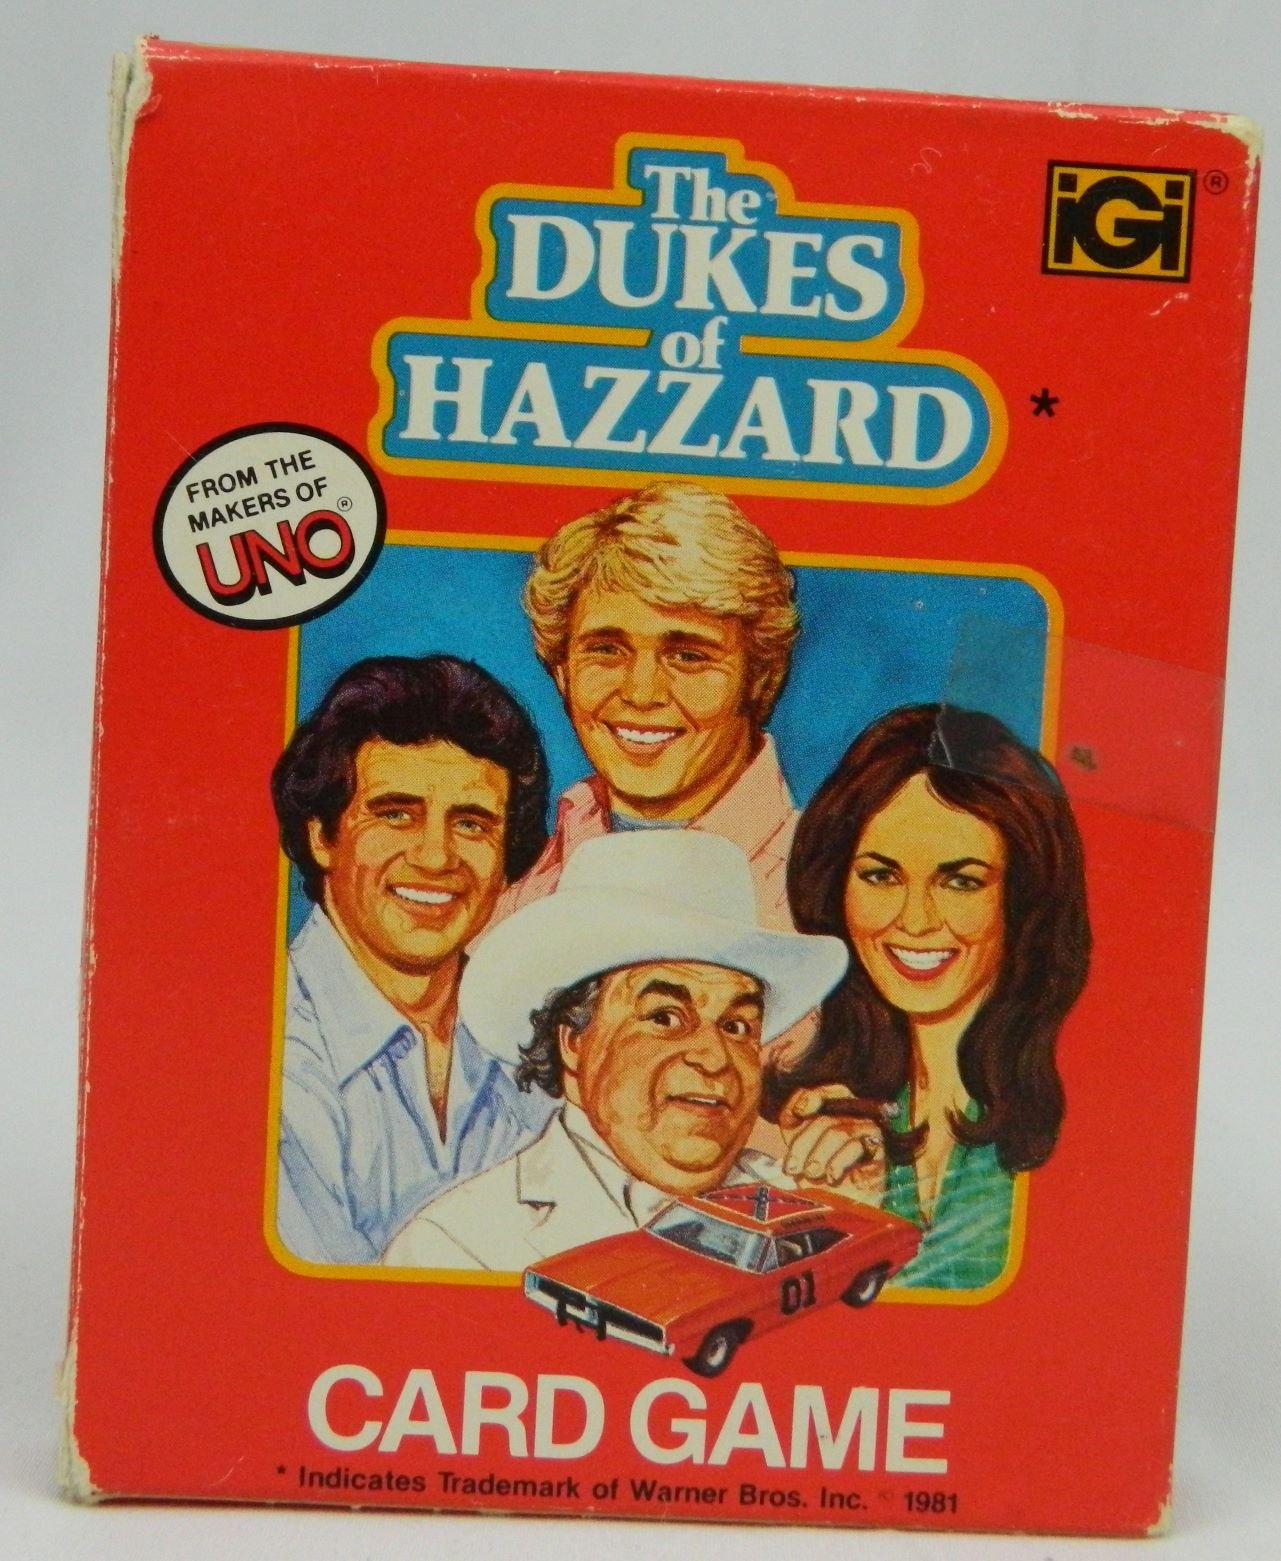 The Dukes of Hazzard Card Game Review and Rules